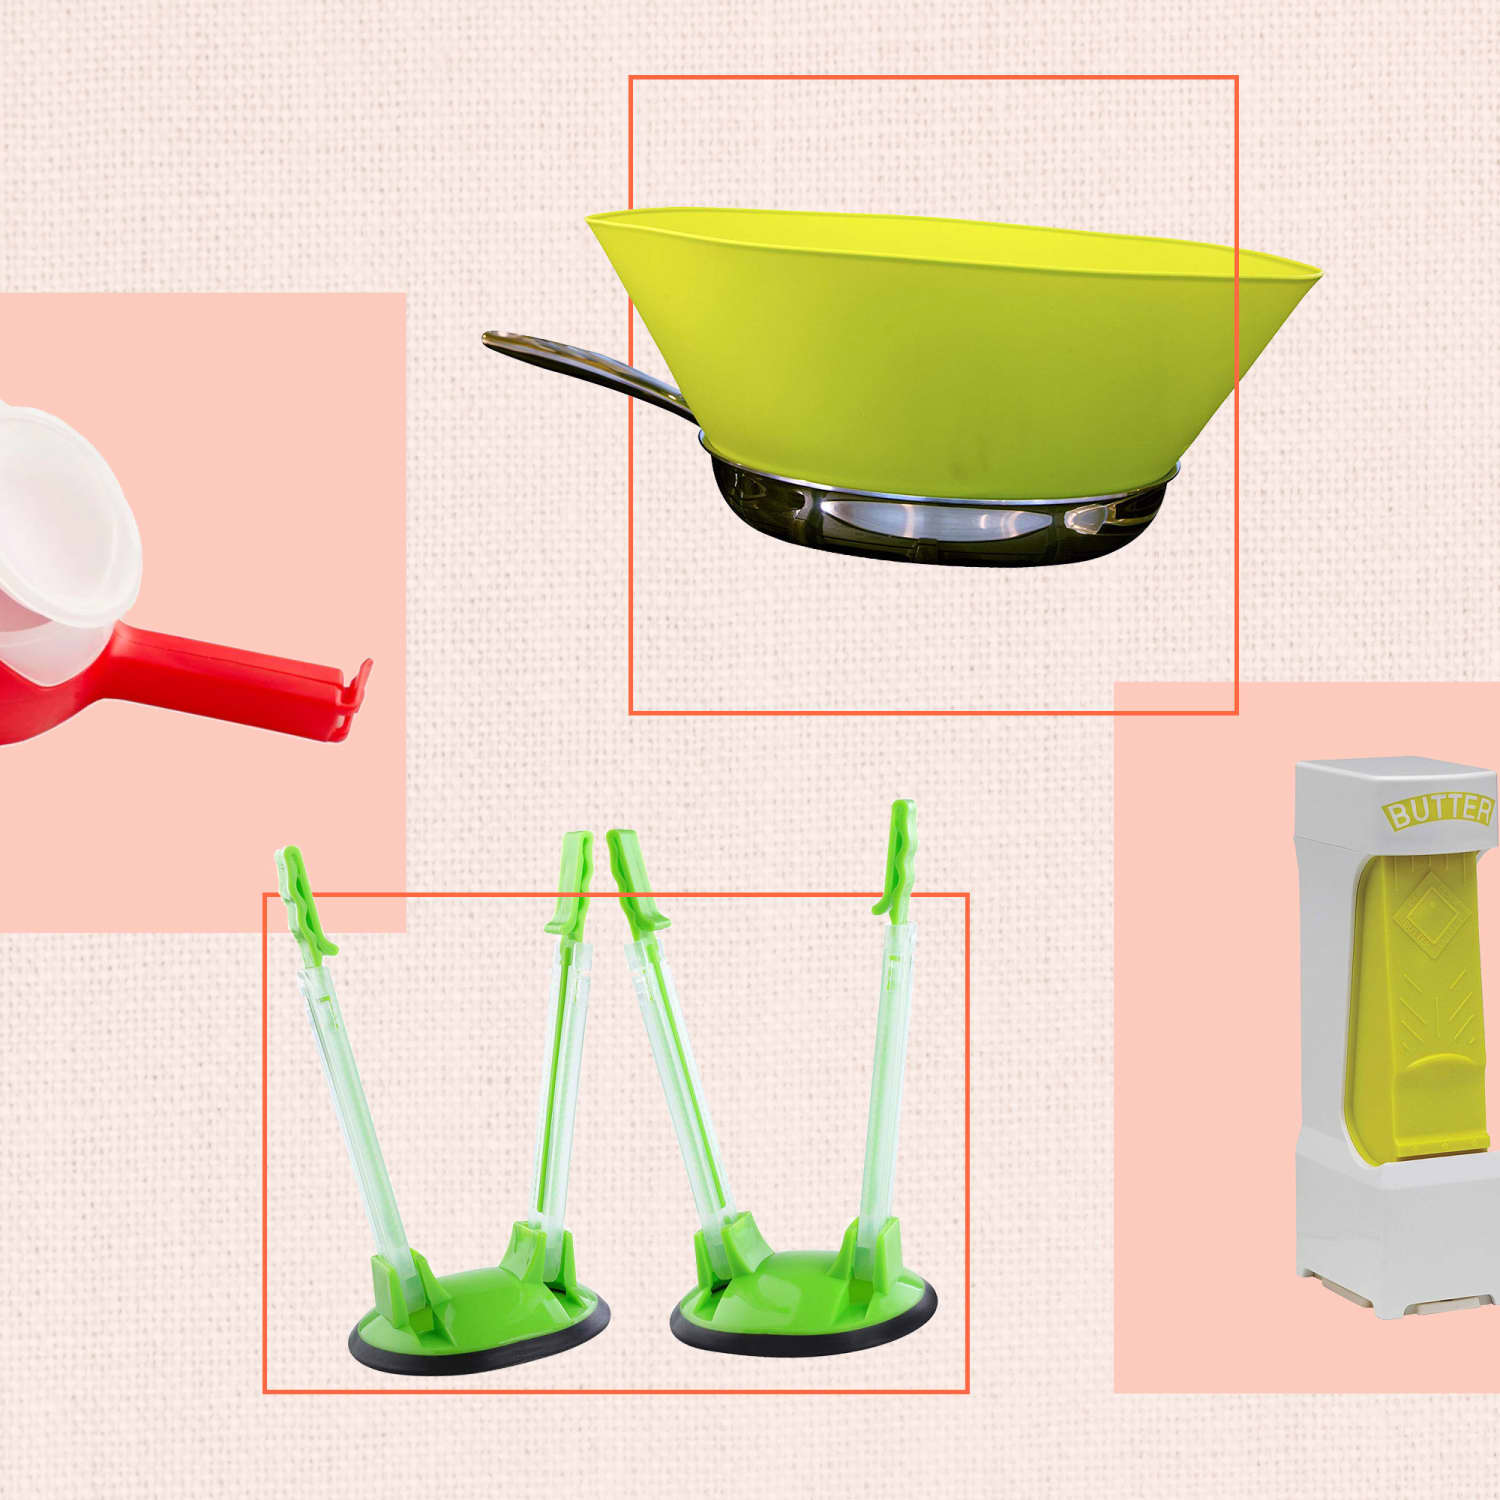 11 Strange Kitchen Gadgets You Didn't Know Existed 